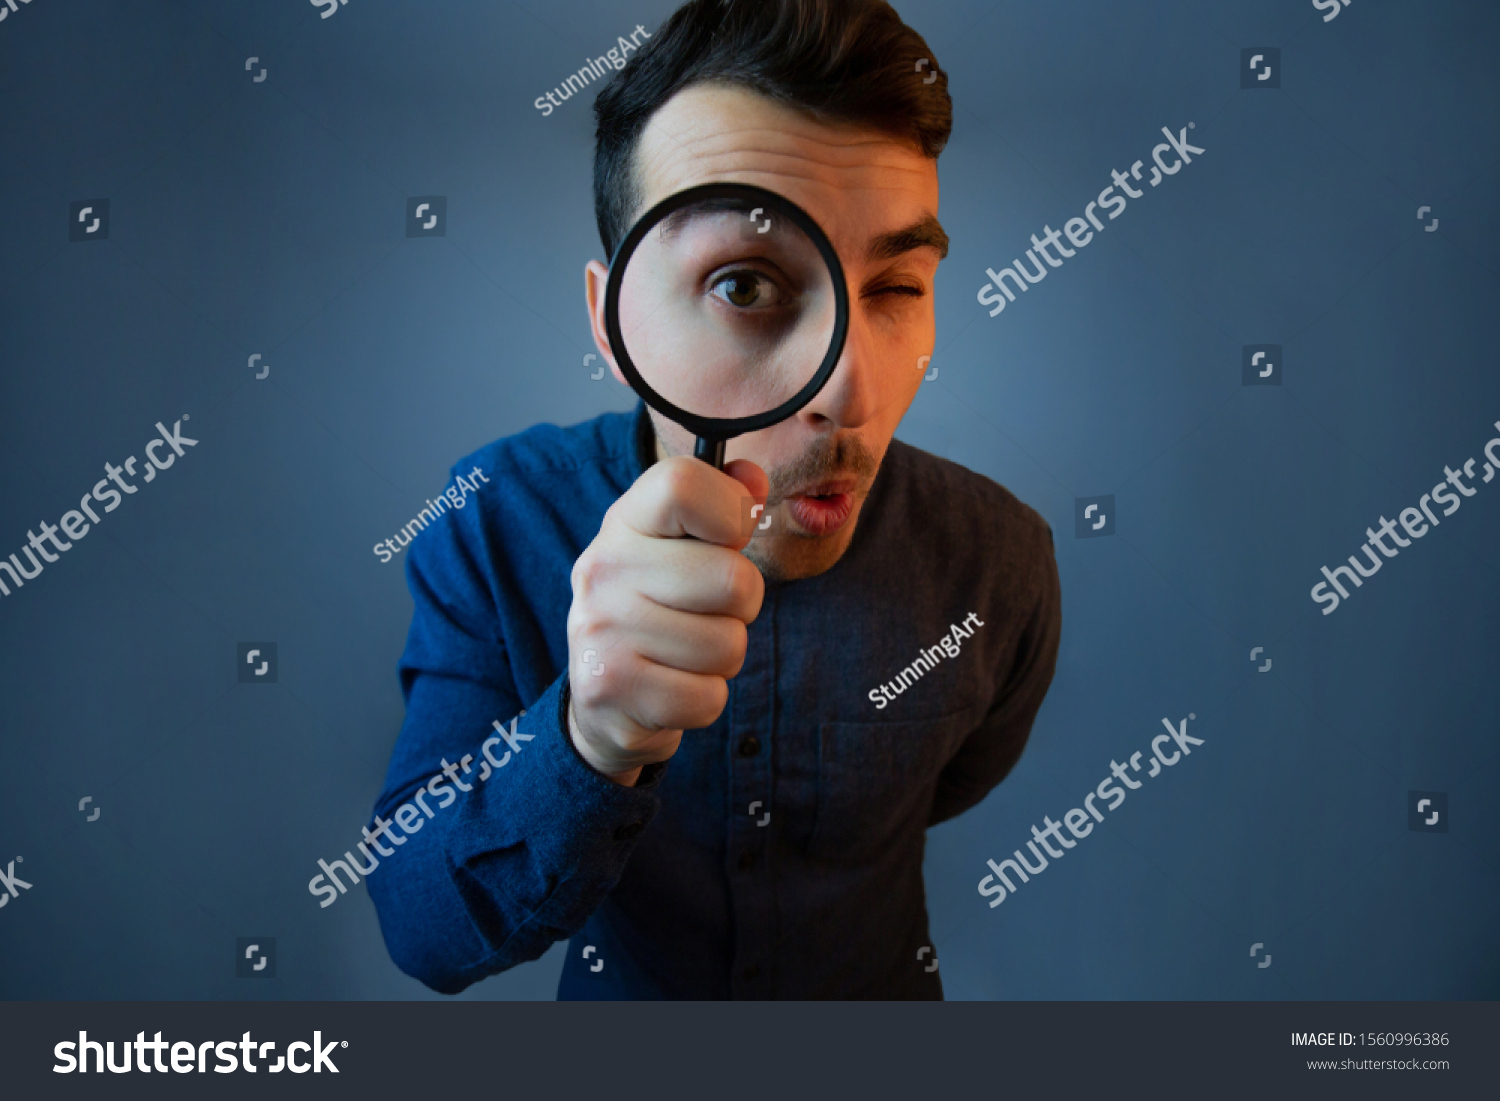 Curious young man with magnifying glass Isolated on grey background. Surprised Young man student holding magnifying glass. #1560996386